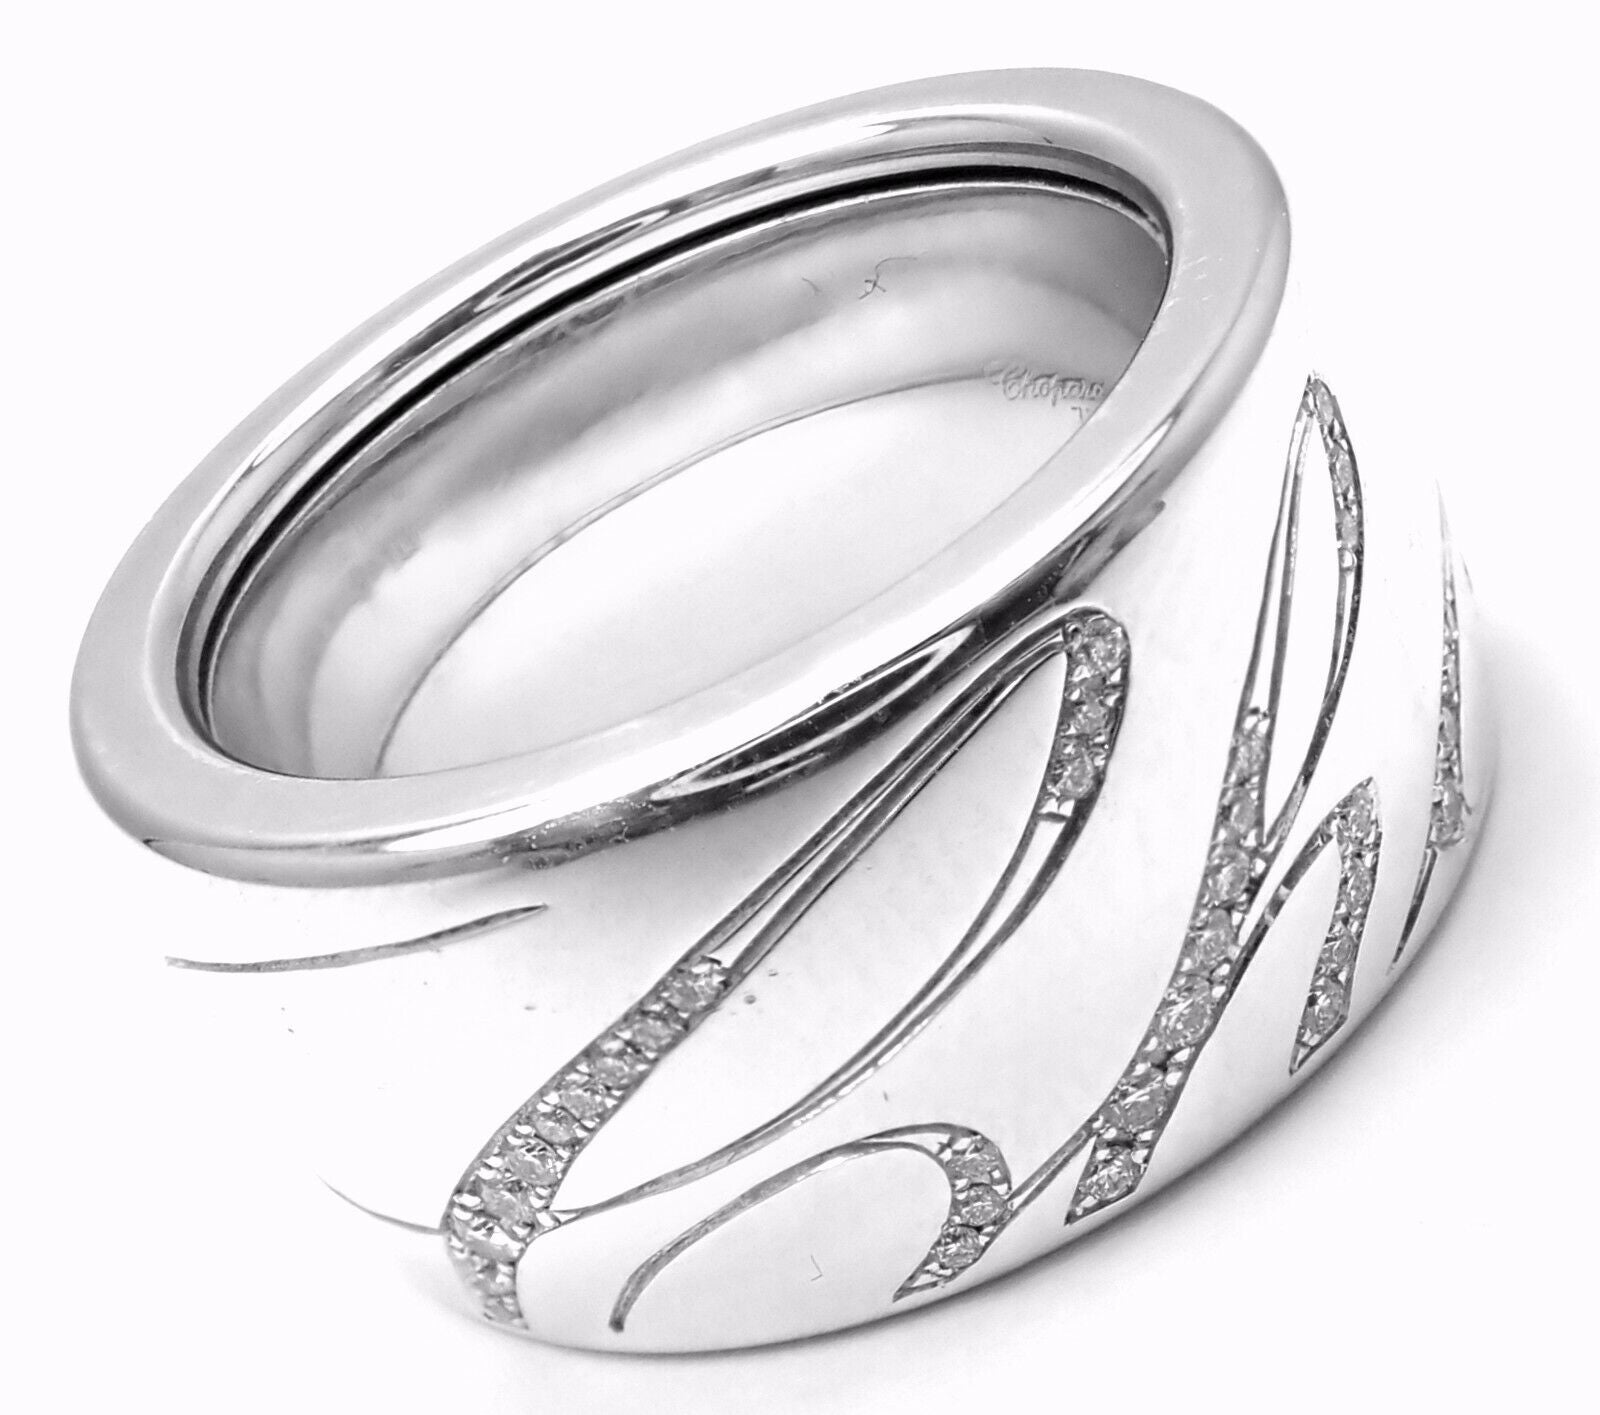 Chopard Jewelry & Watches:Fine Jewelry:Rings Chopard Chopardissimo 18k White Gold Diamond Signature Band Ring Size 6.25 Cert.